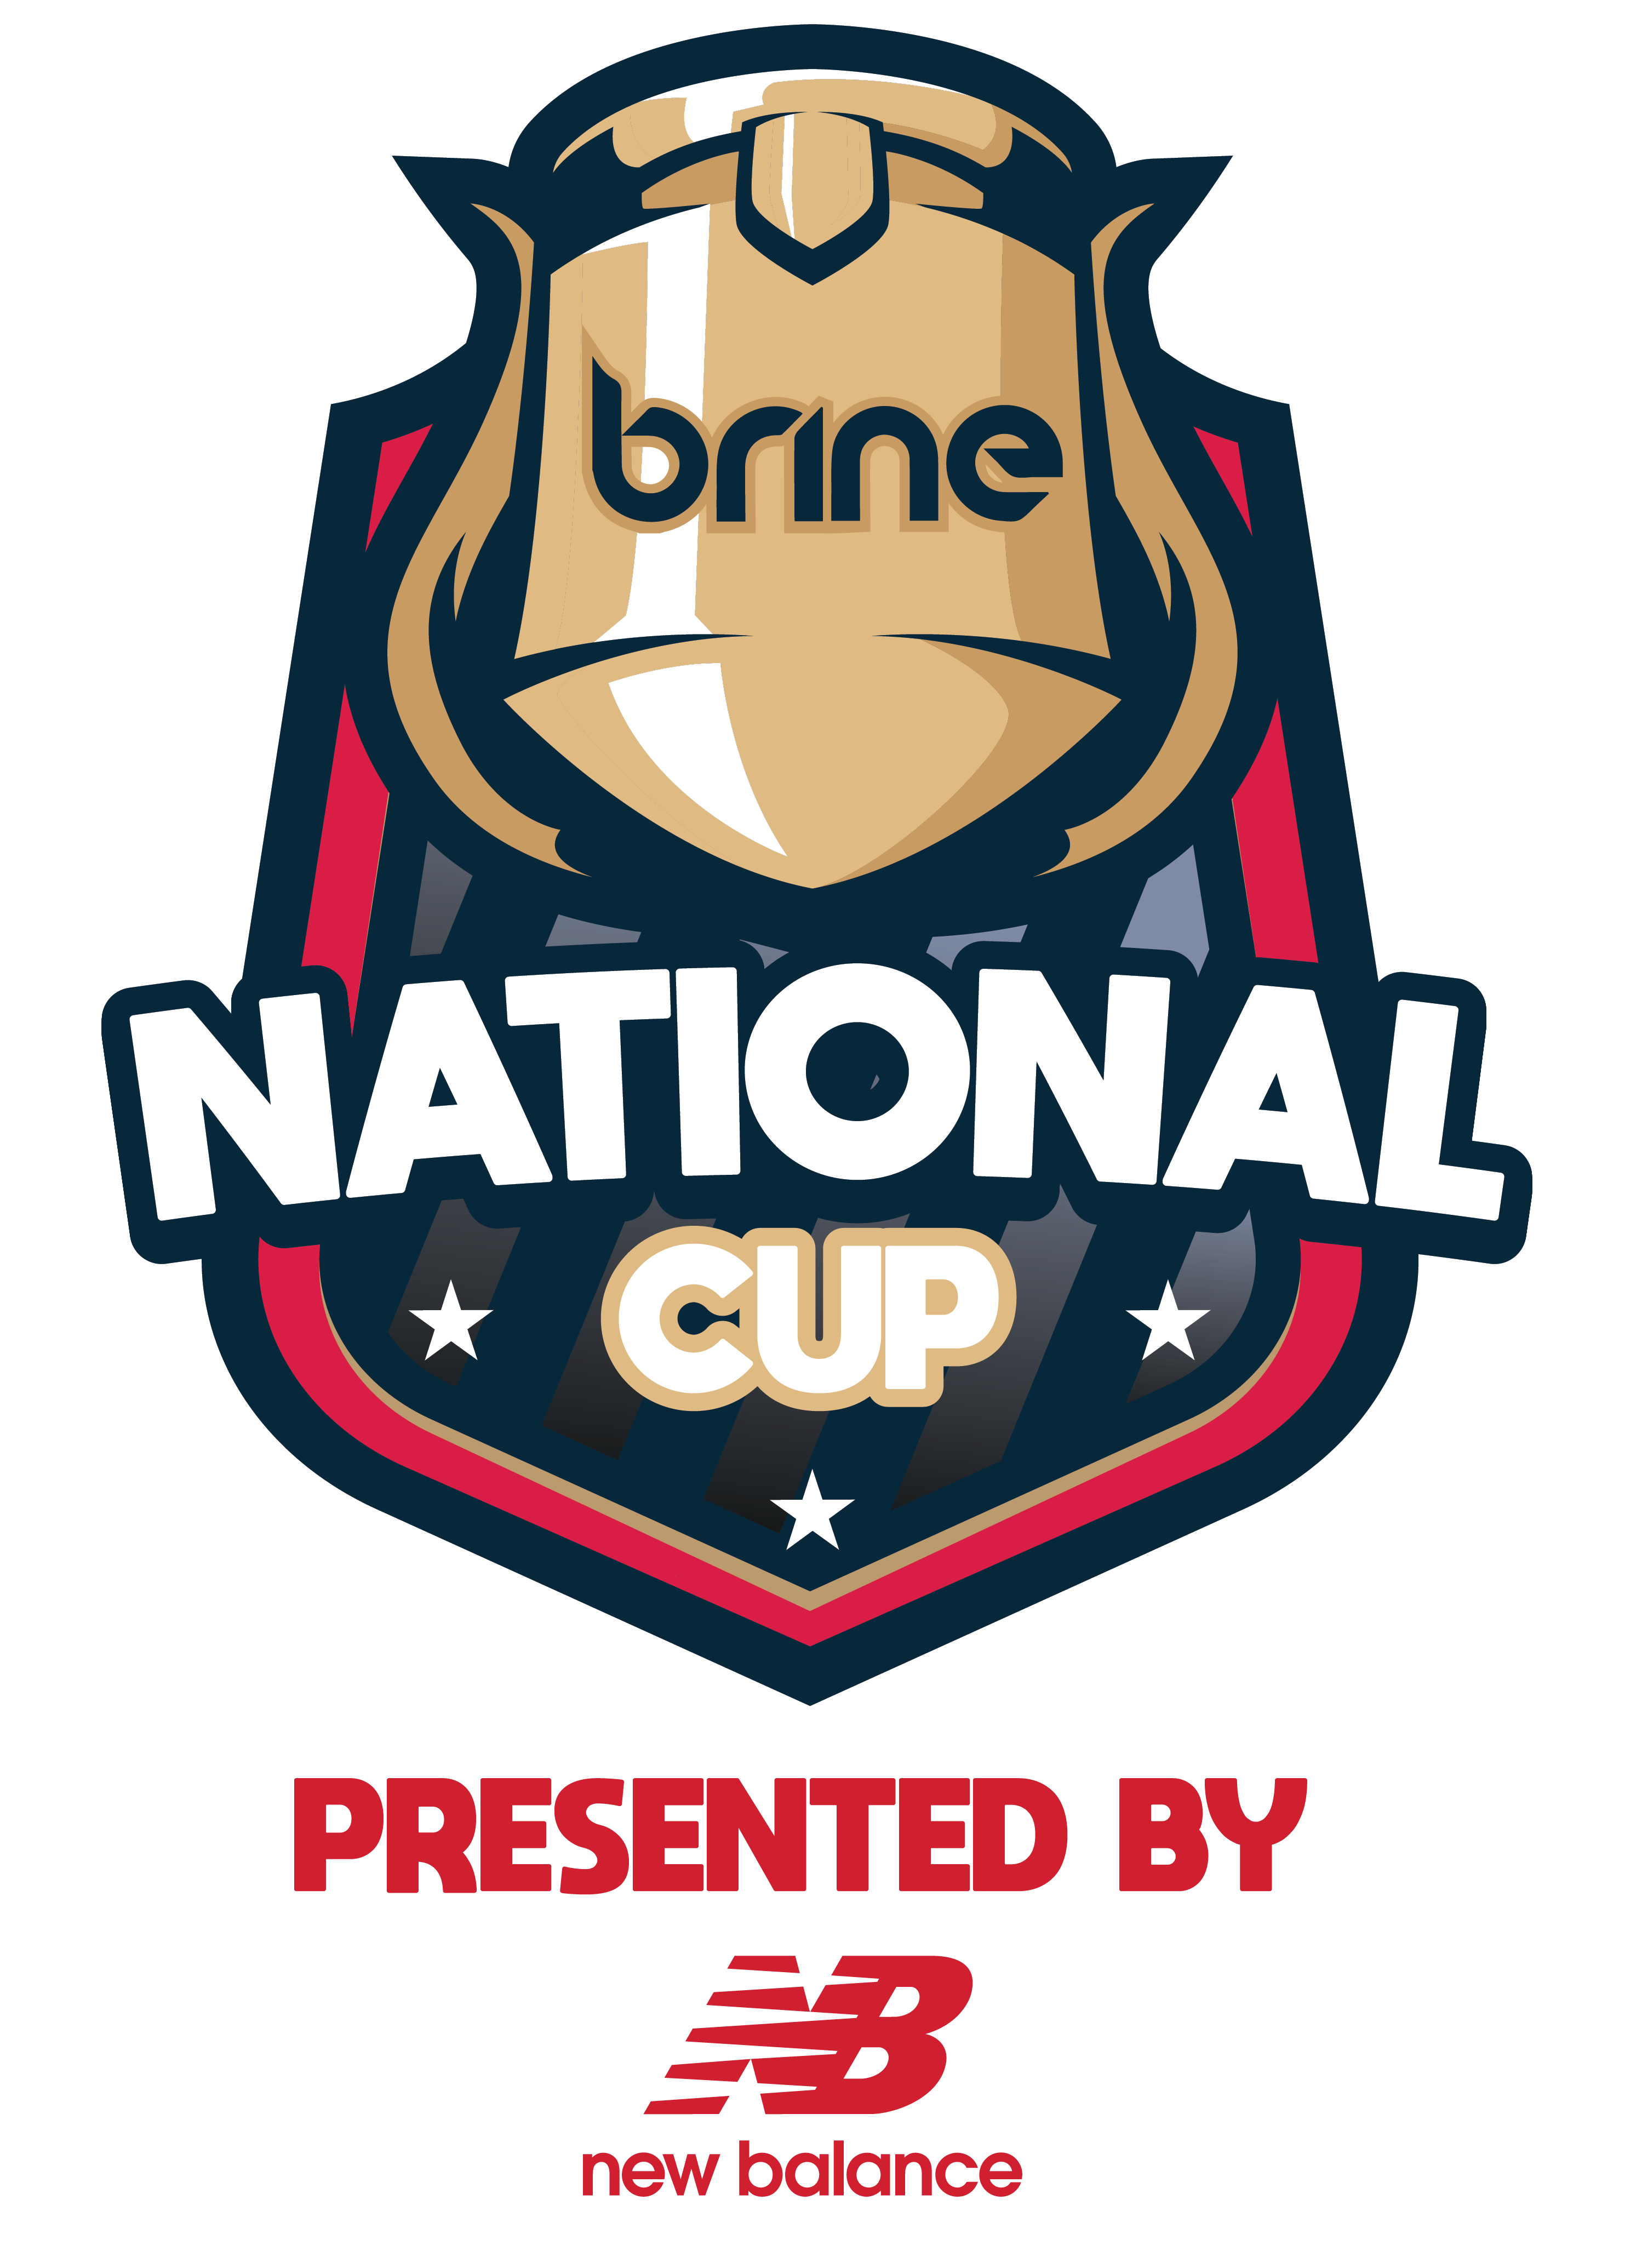 Nations Cup National Championship